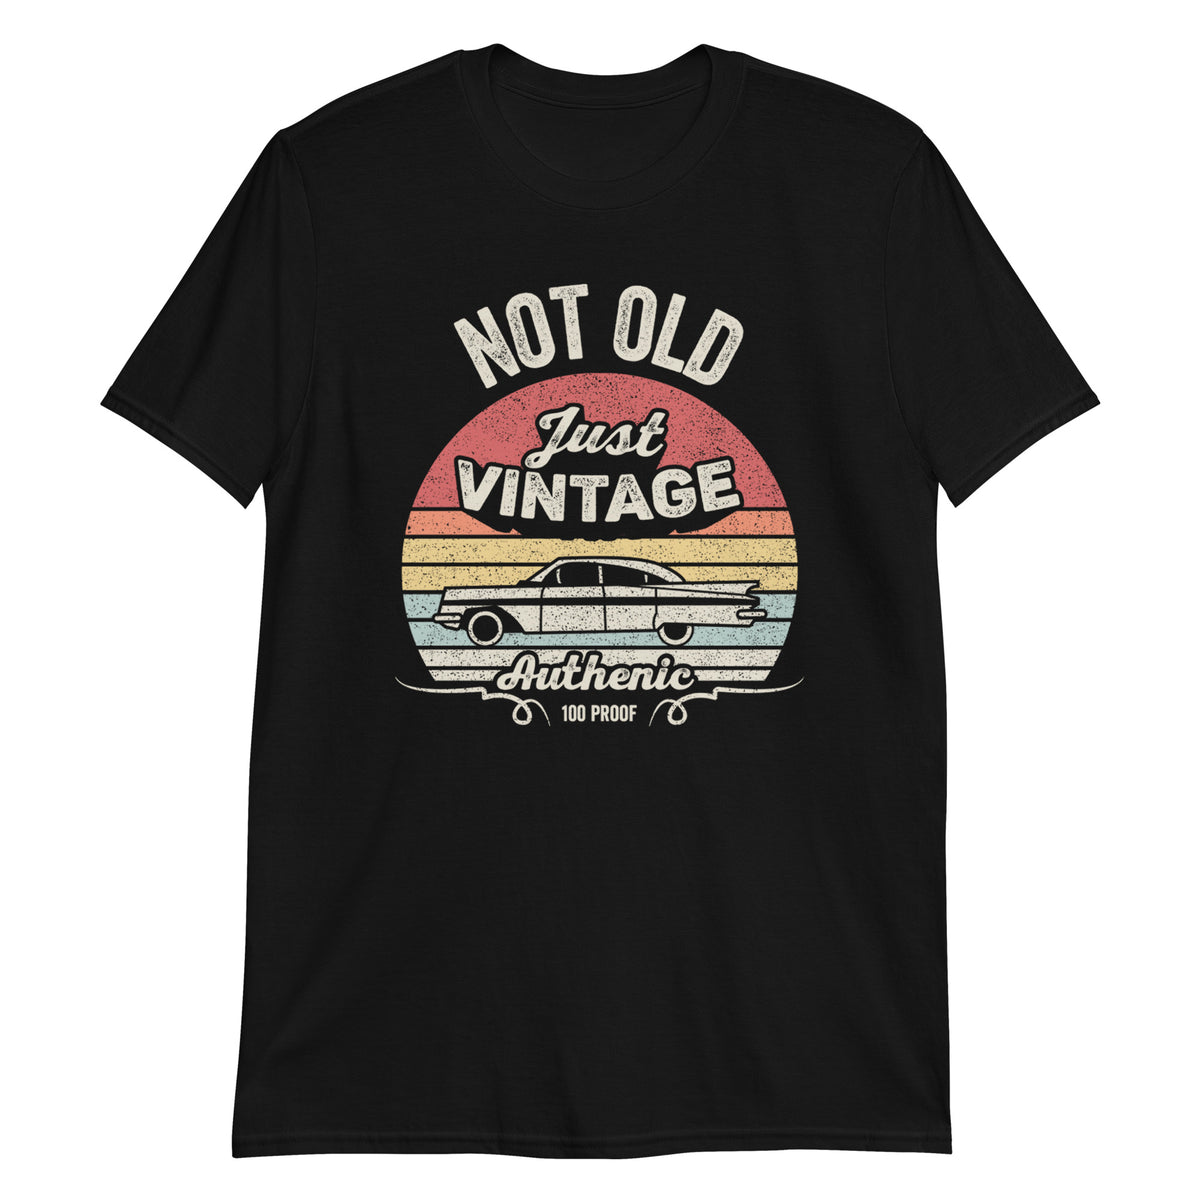 Not Old Just Vintage Authentic T-Shirt